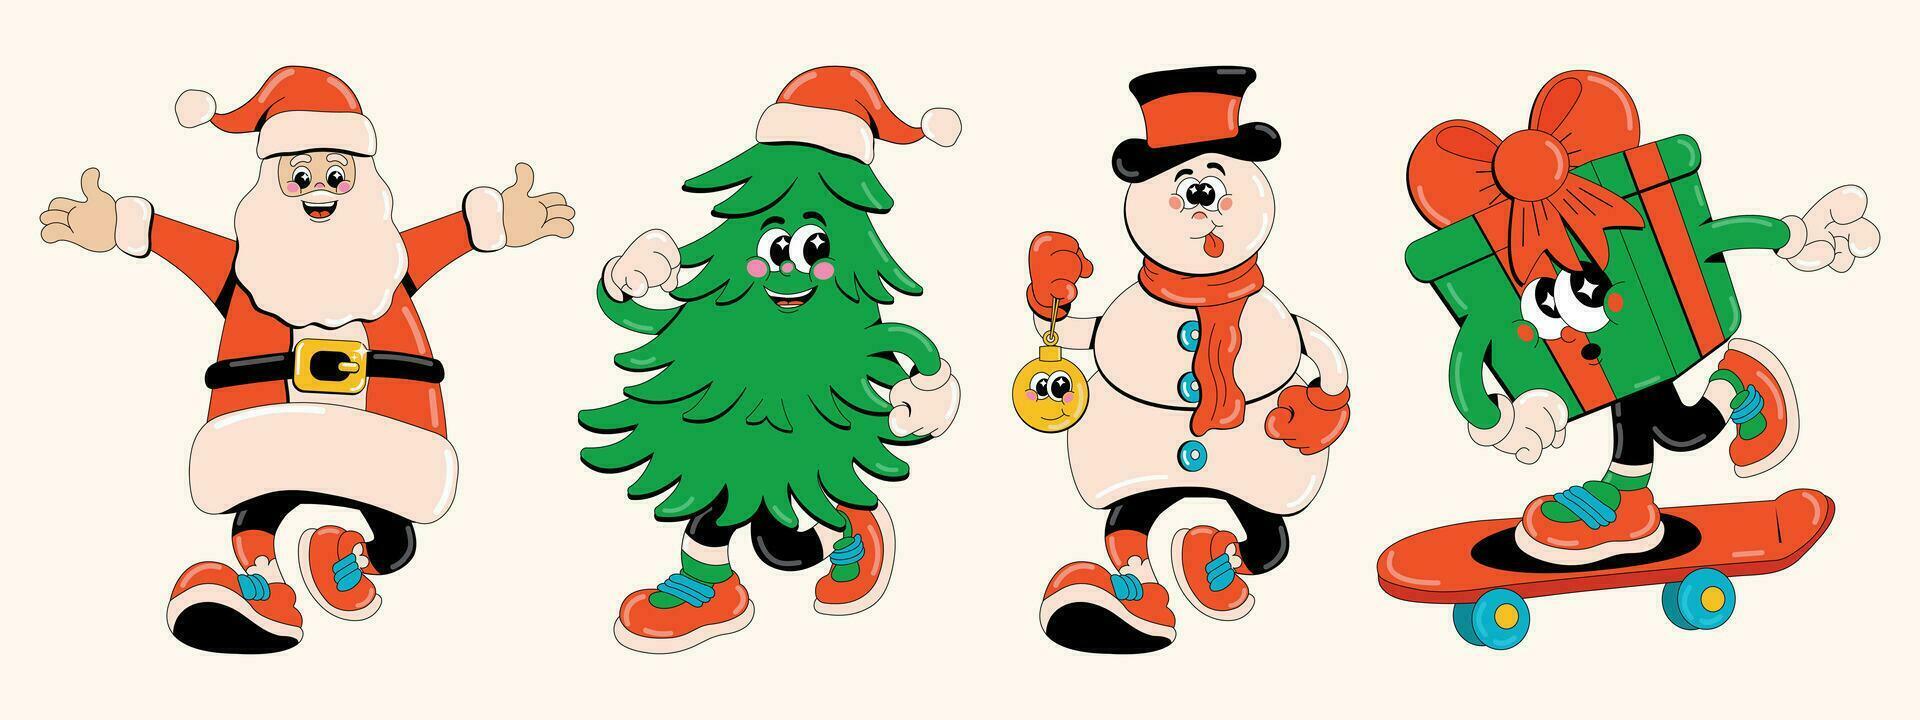 Funny retro cartoon characters on a Christmas theme. Merry Christmas. Set of vector stickers.